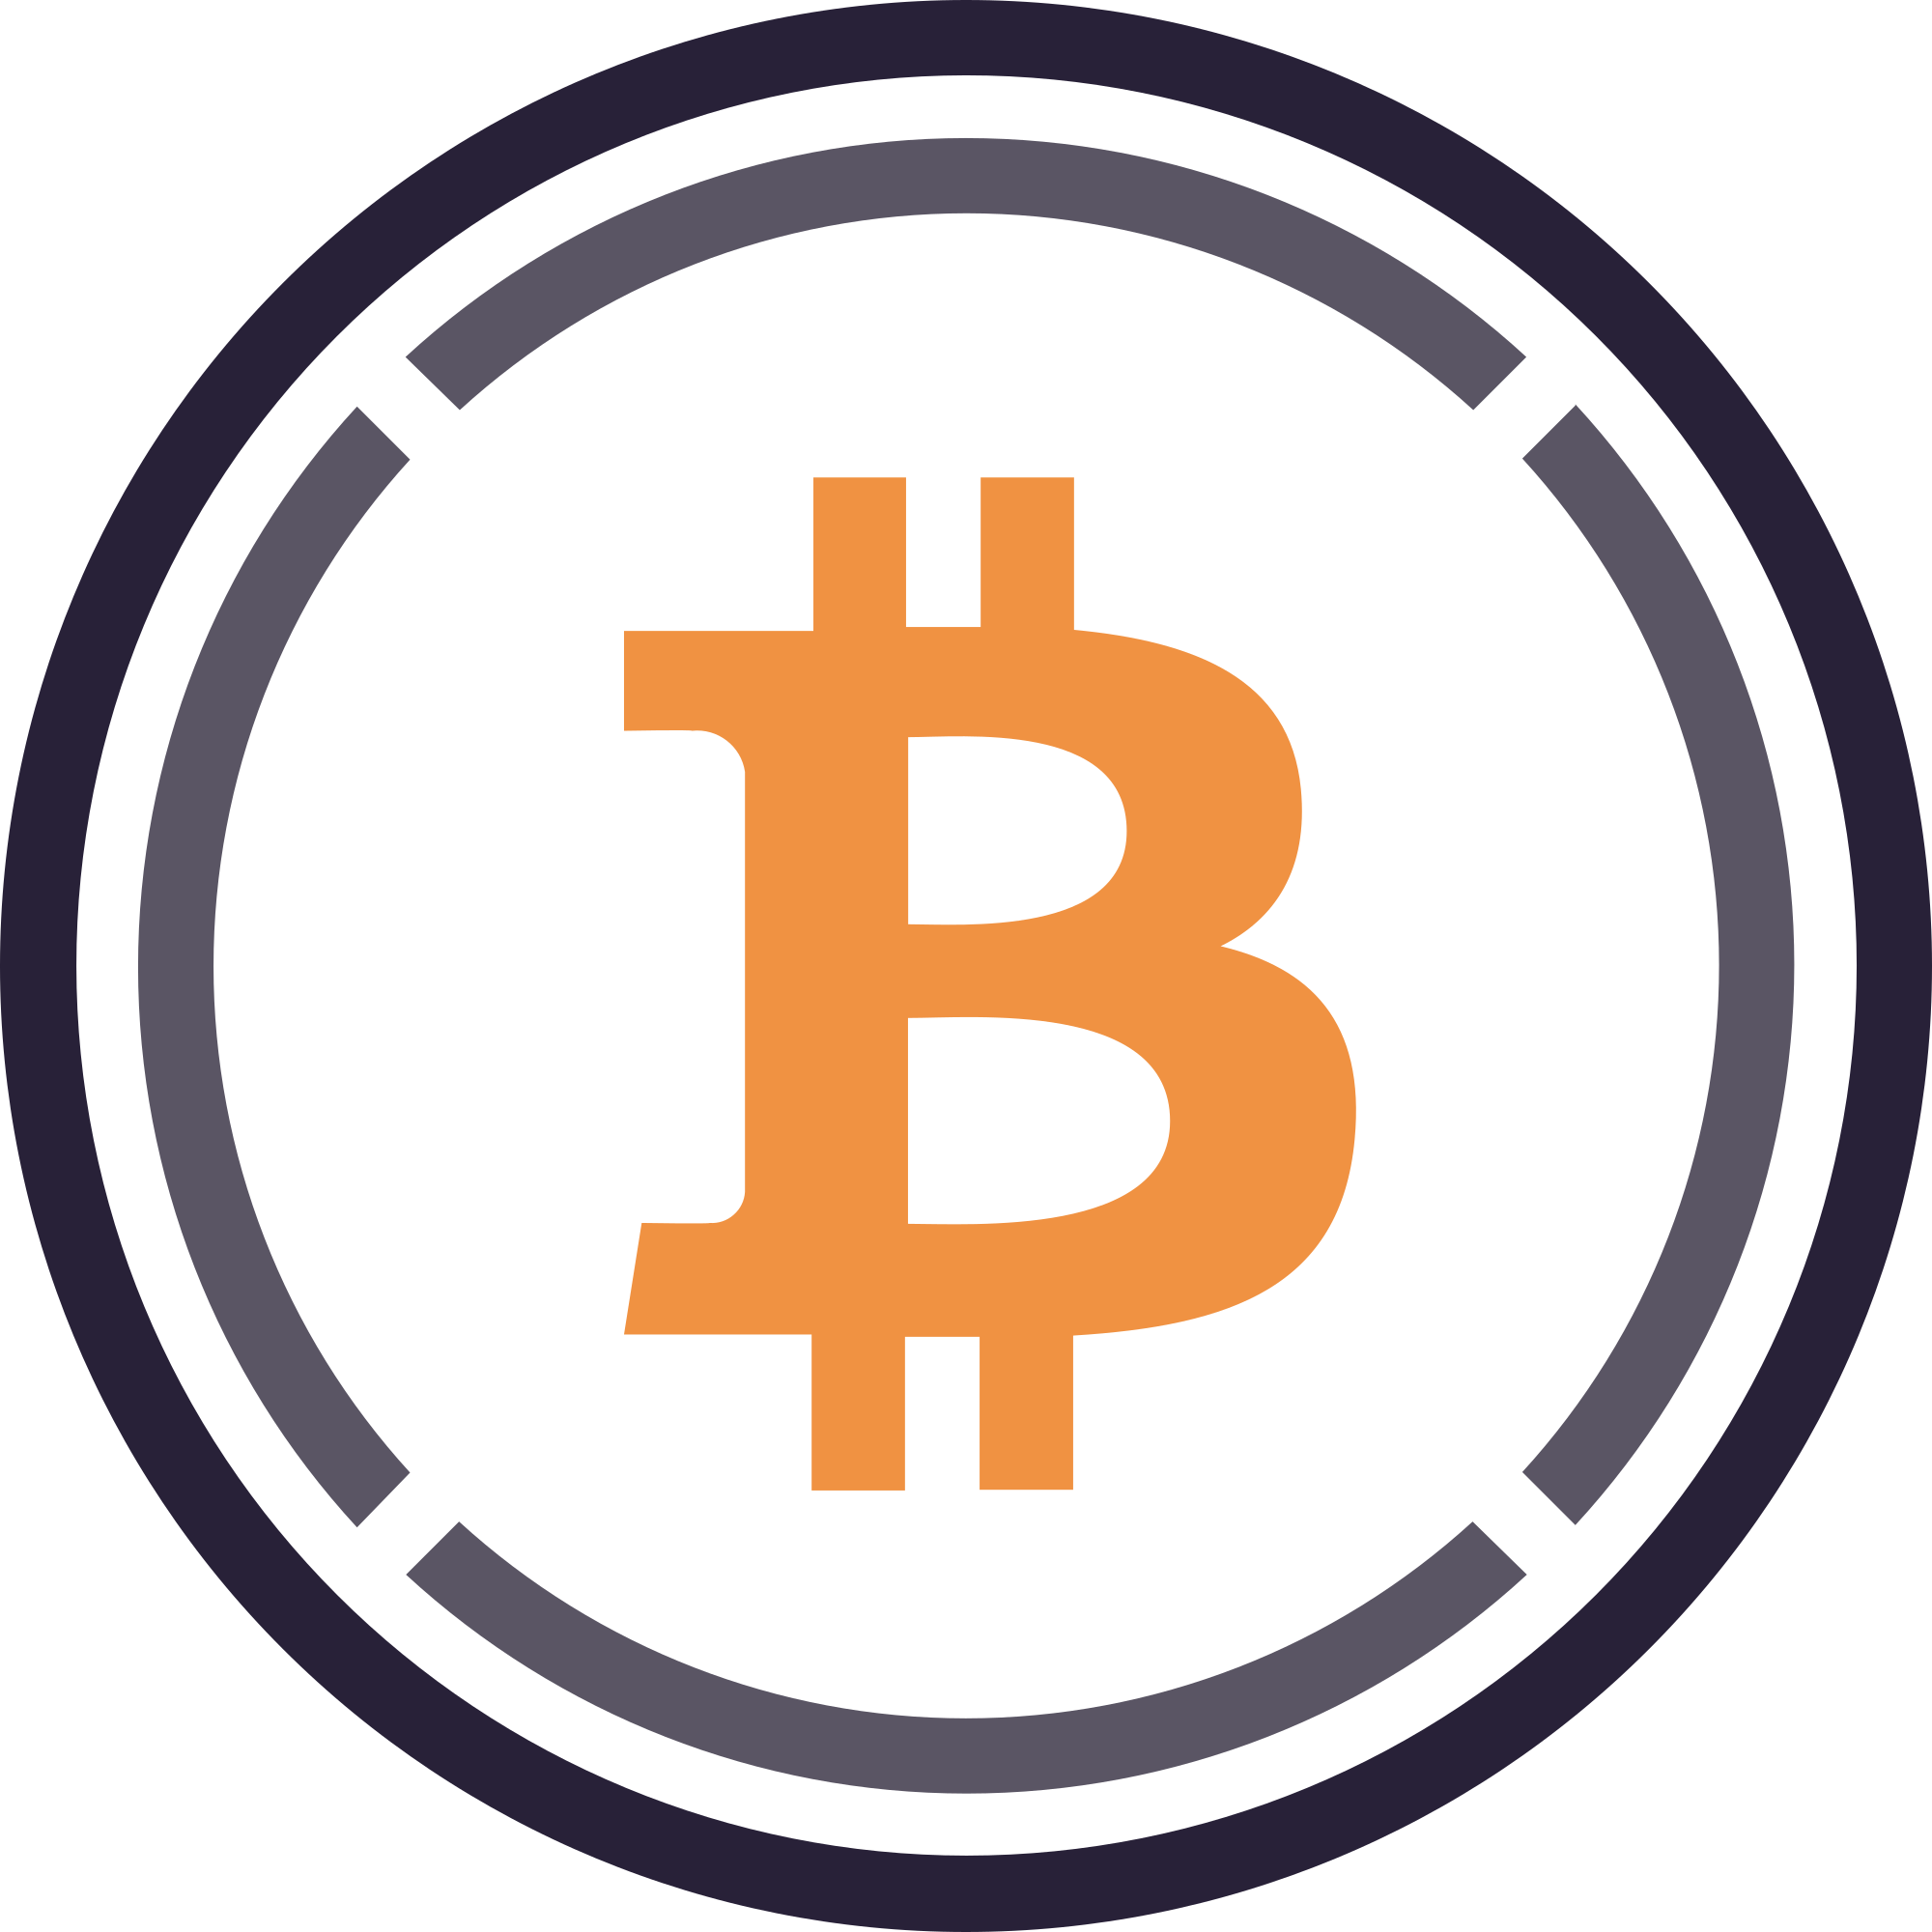 An image of the Wrapped Bitcoin logo.